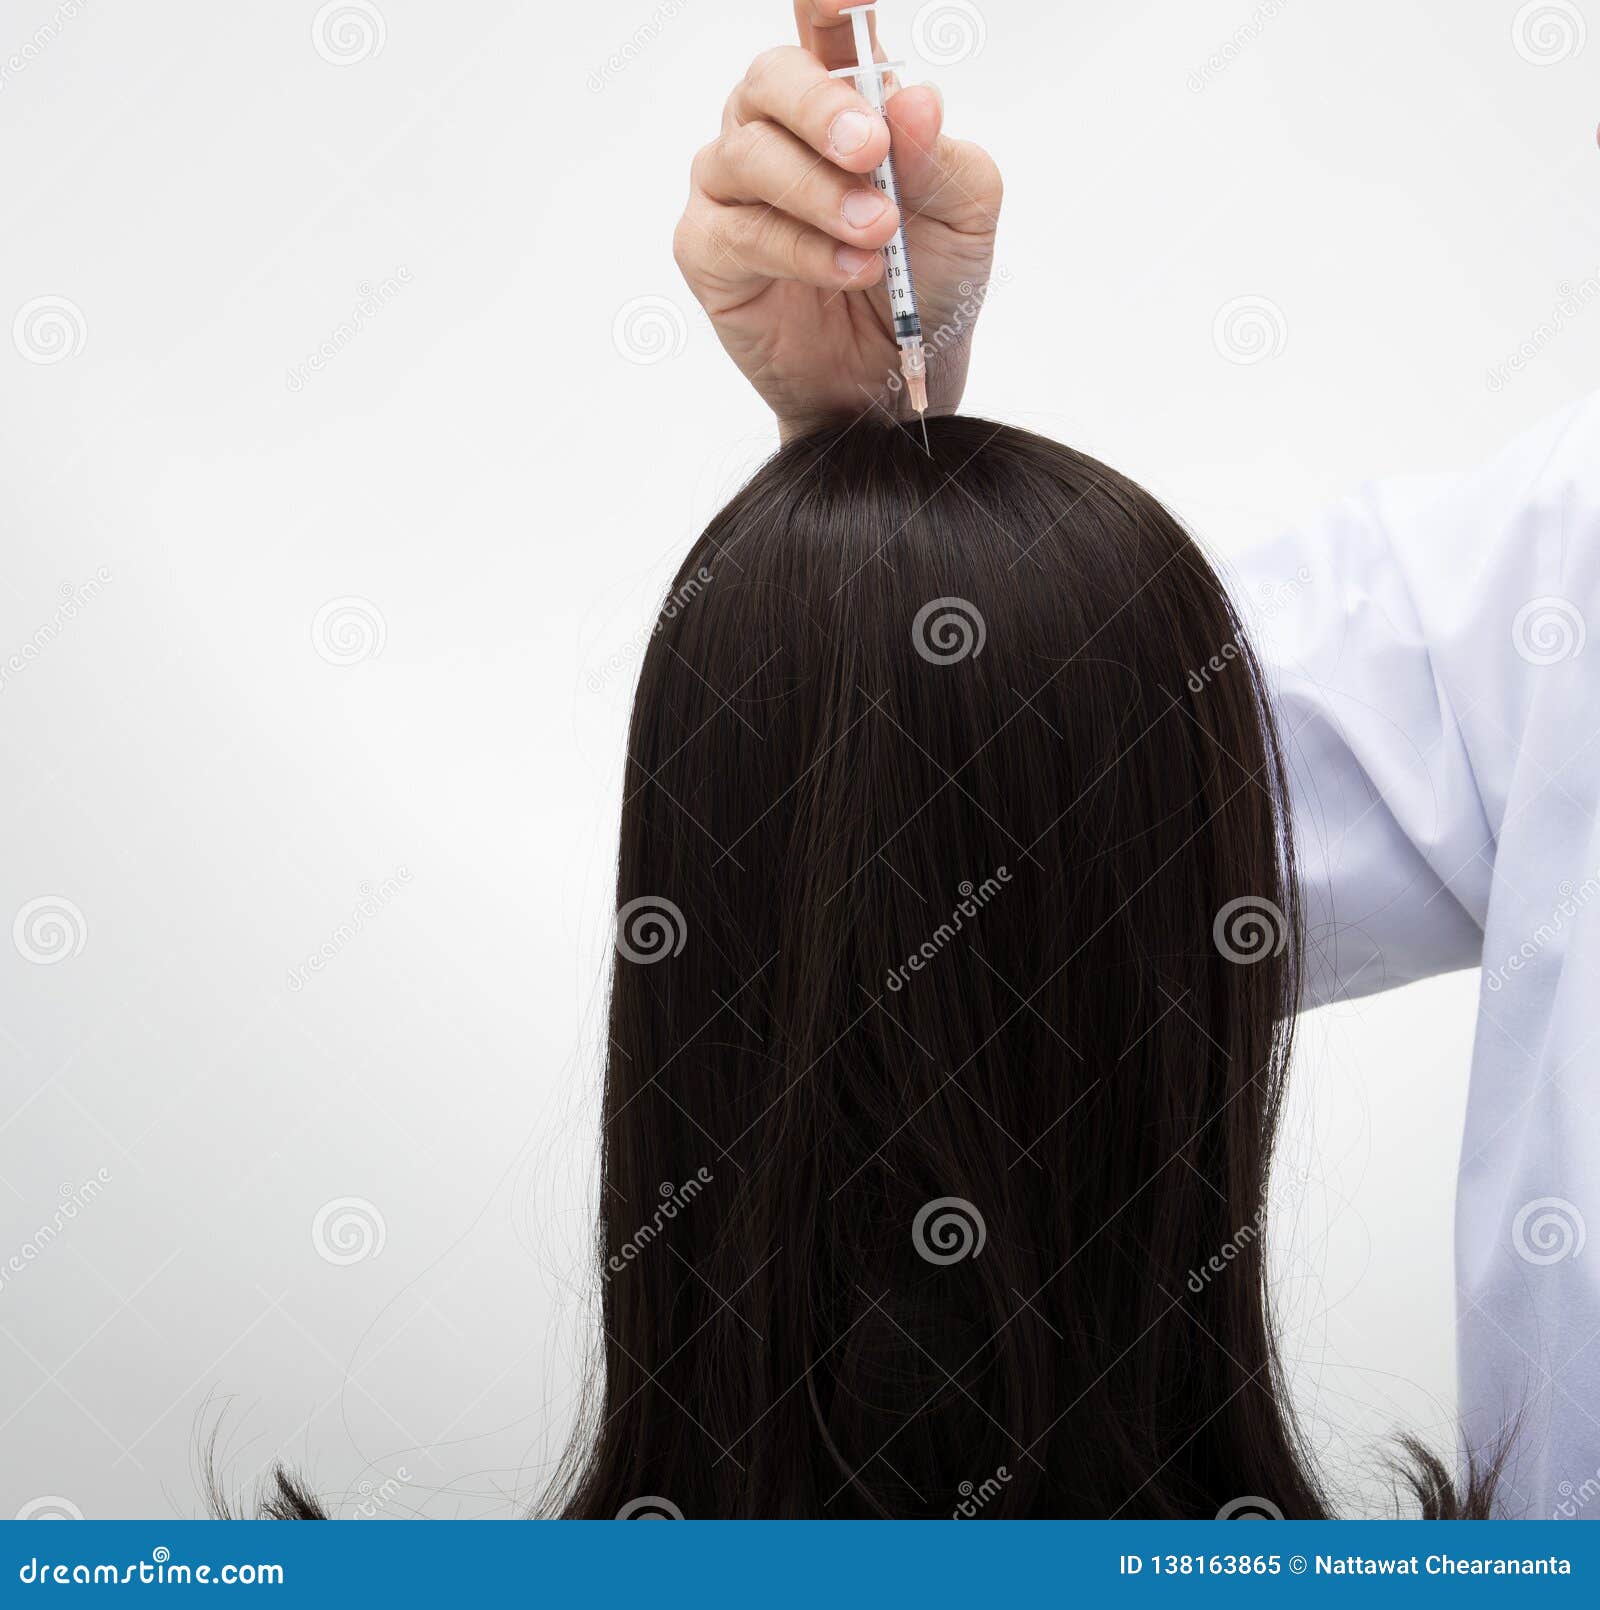 Doctor Inject Treatment Serum Vitamins Hair Fall Stock Image - Image of  baldness, doctor: 138163865